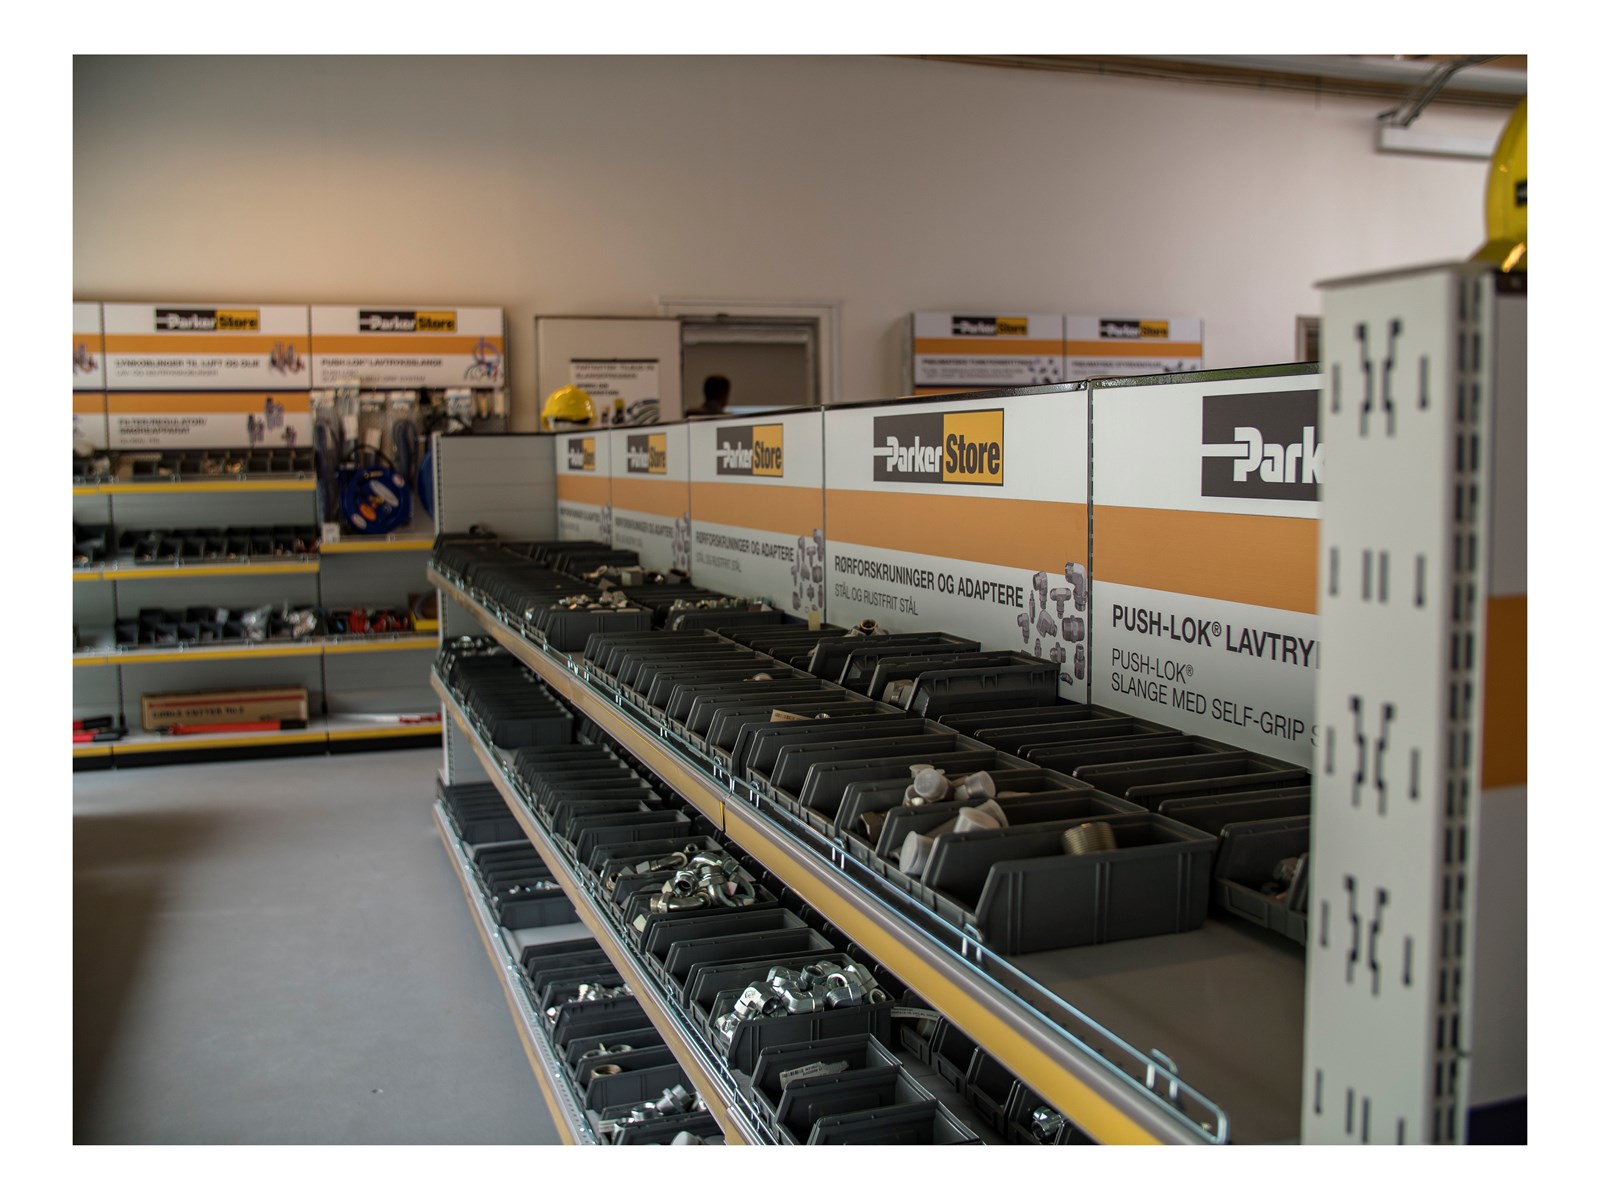 Parkerstore Odense